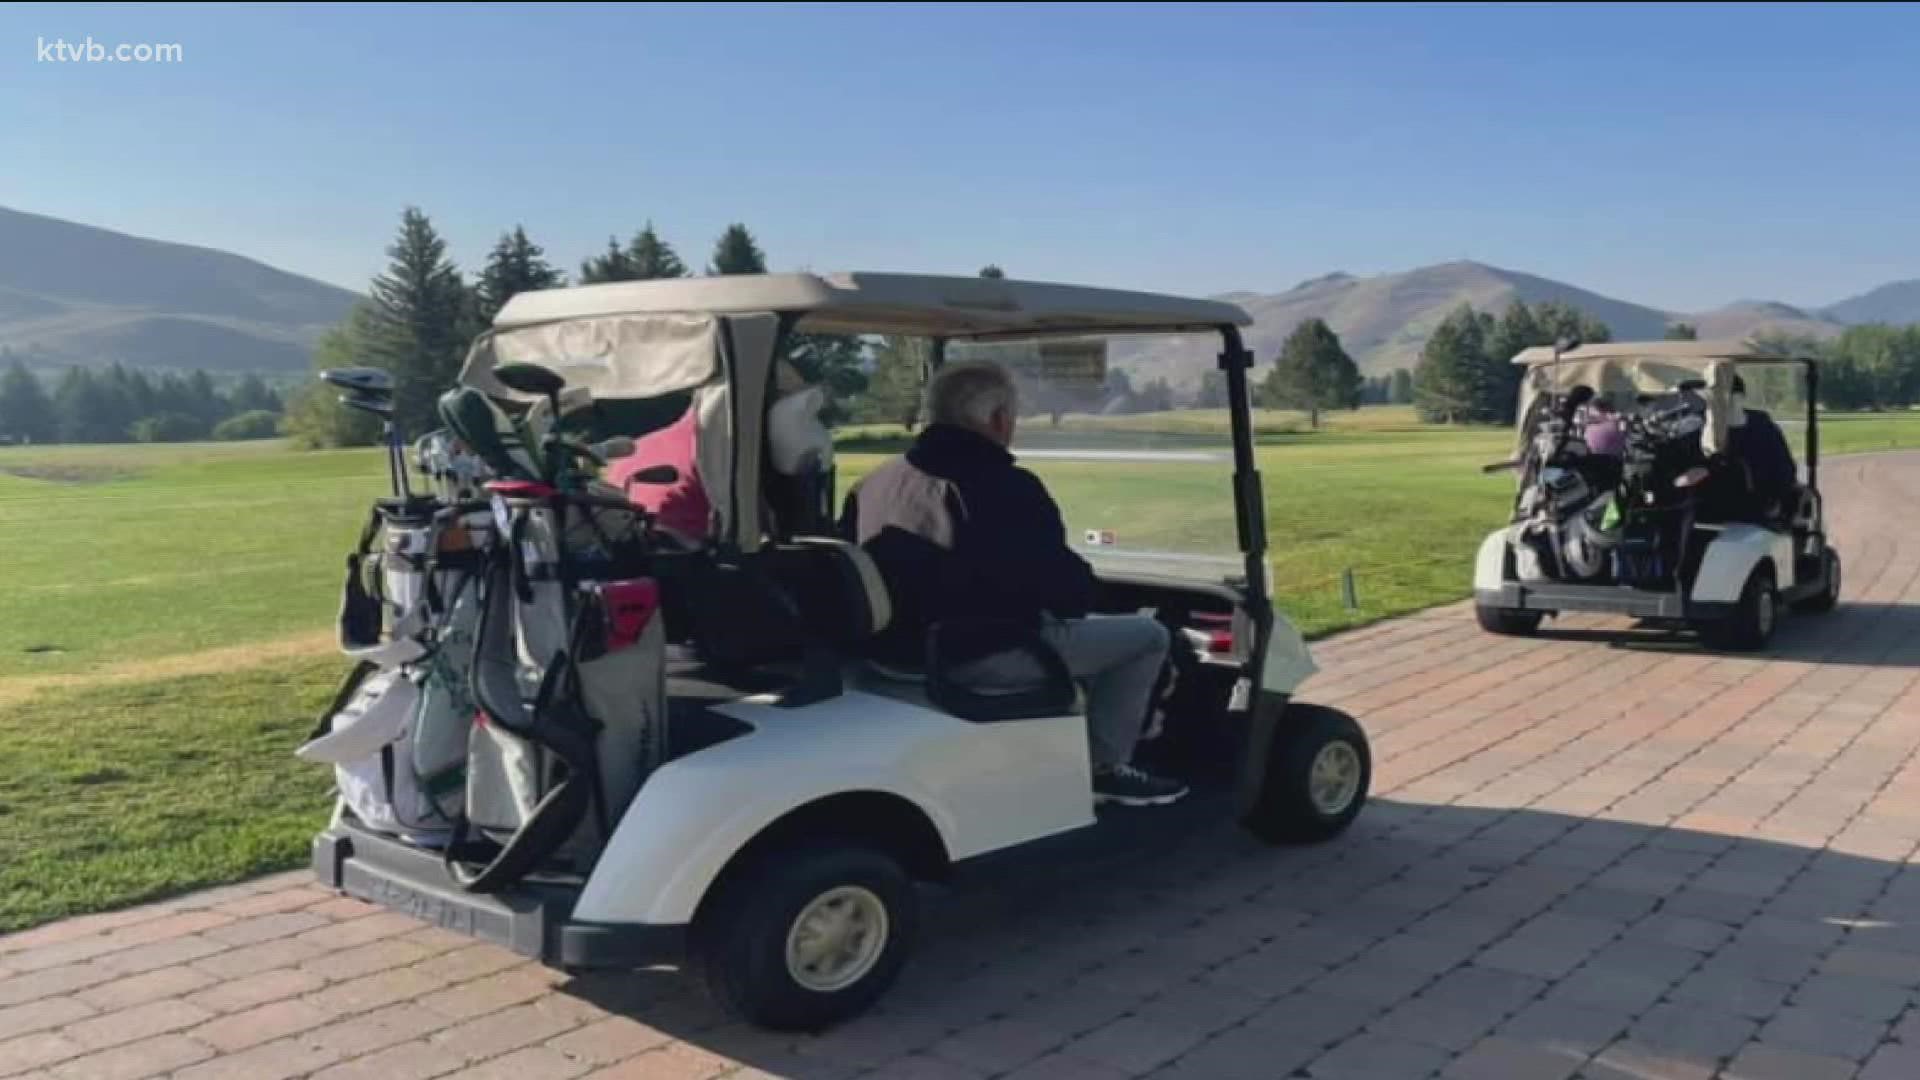 The annual Killebrew-Thompson Memorial Golf Tournament in Sun Valley ended up raising $1.1 million this year.